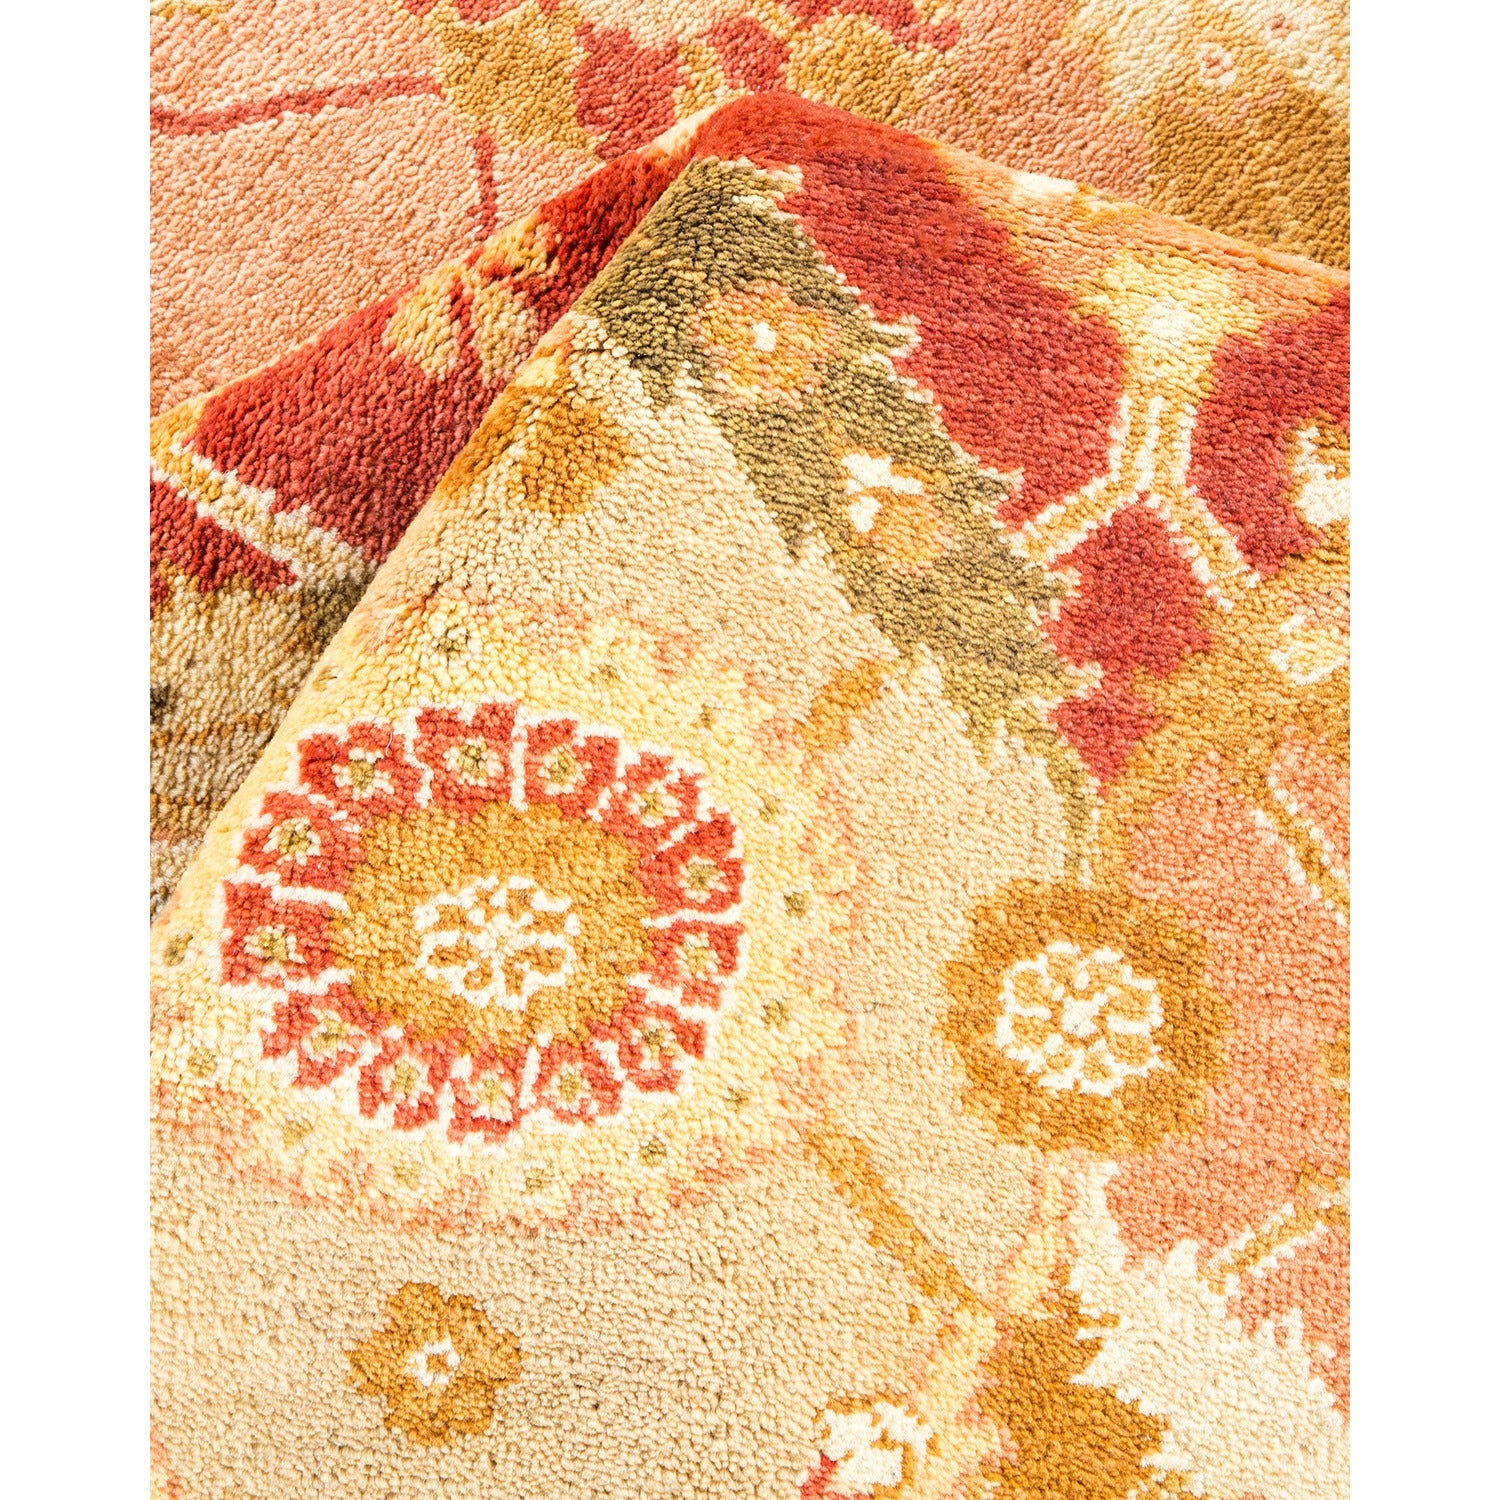 Close-up of a warm, textured rug with intricate floral pattern